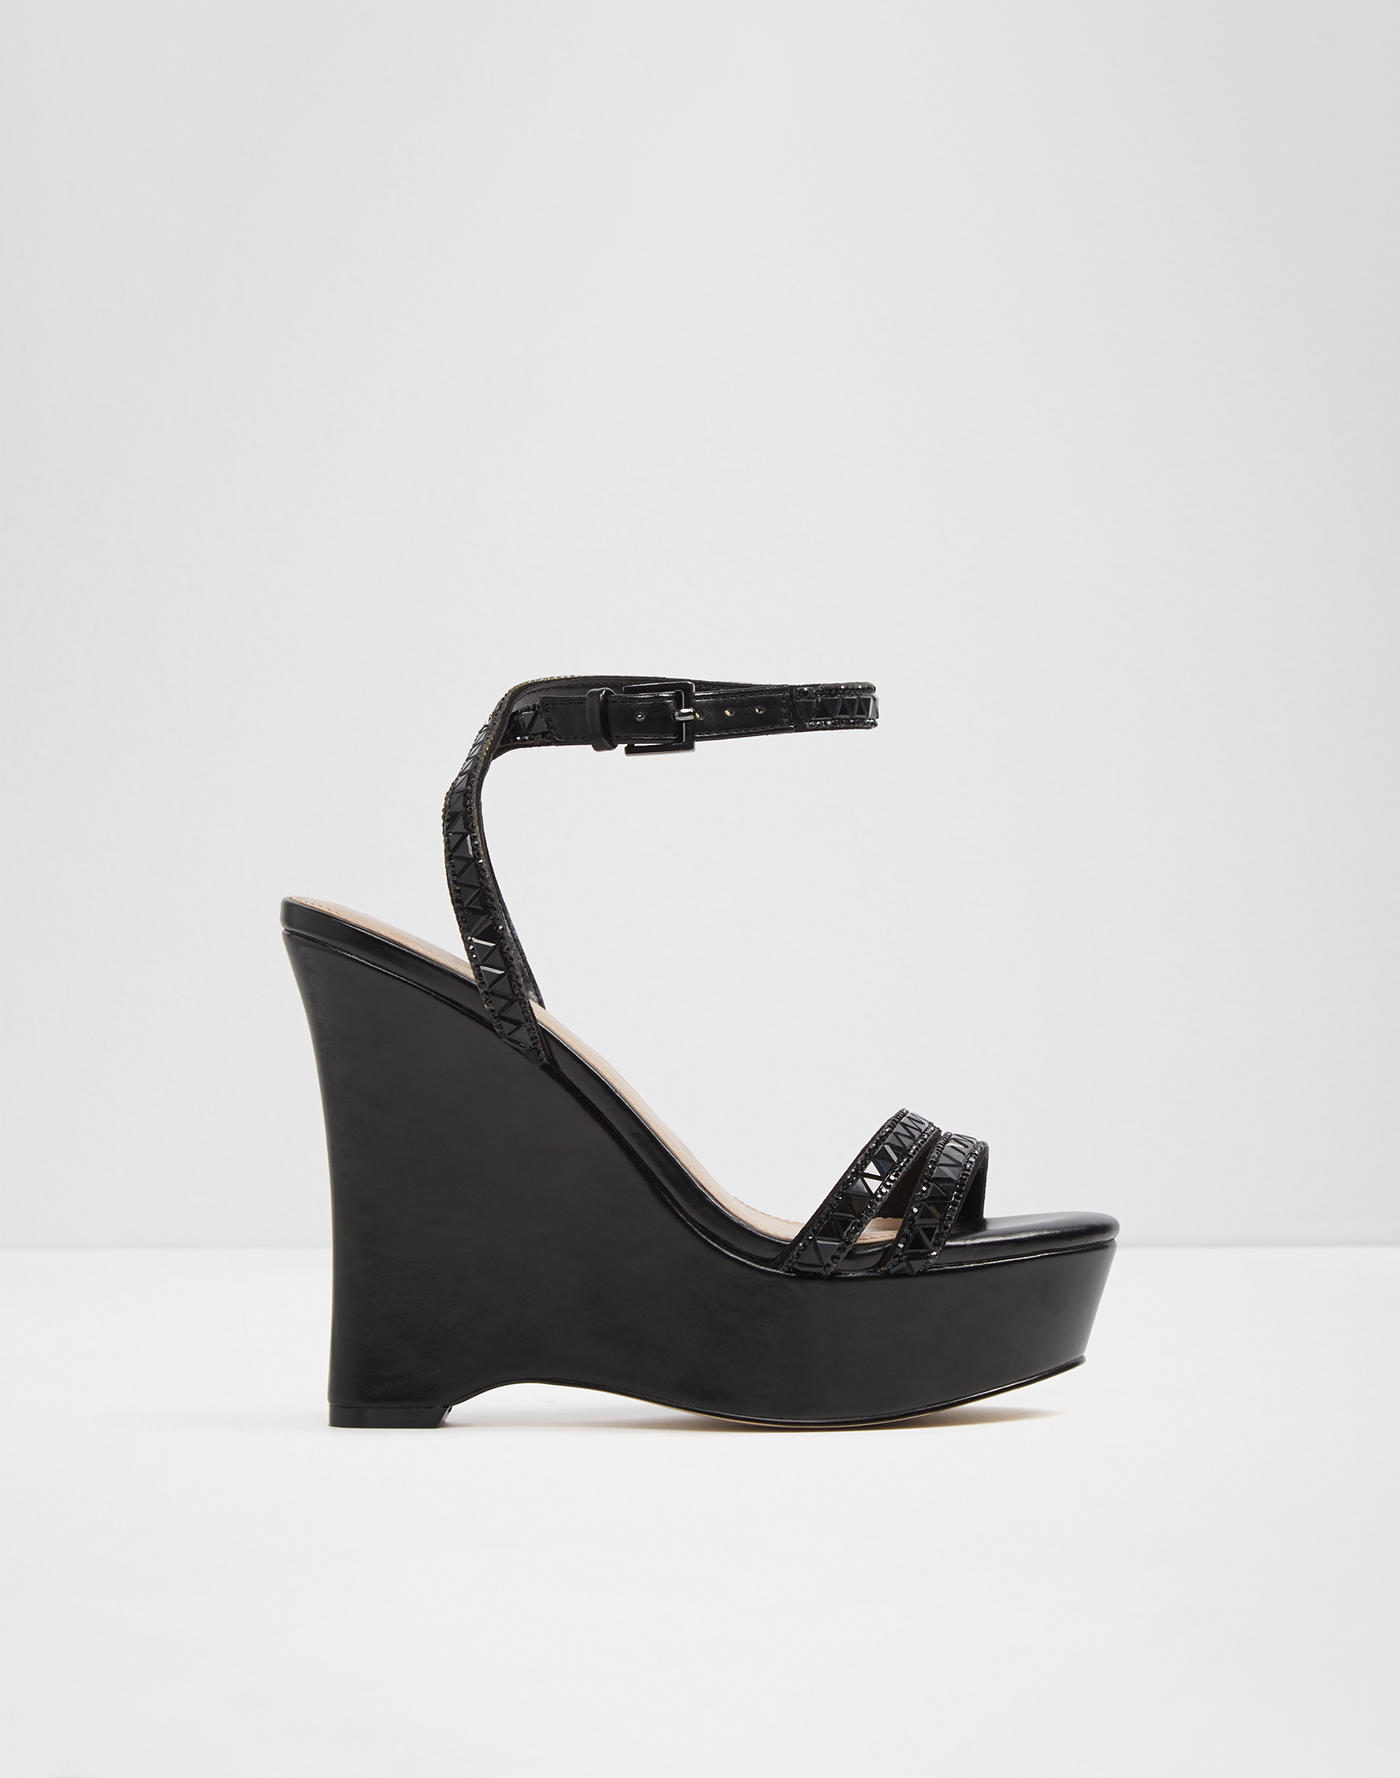 Clearance heels for women | Aldoshoes.com US